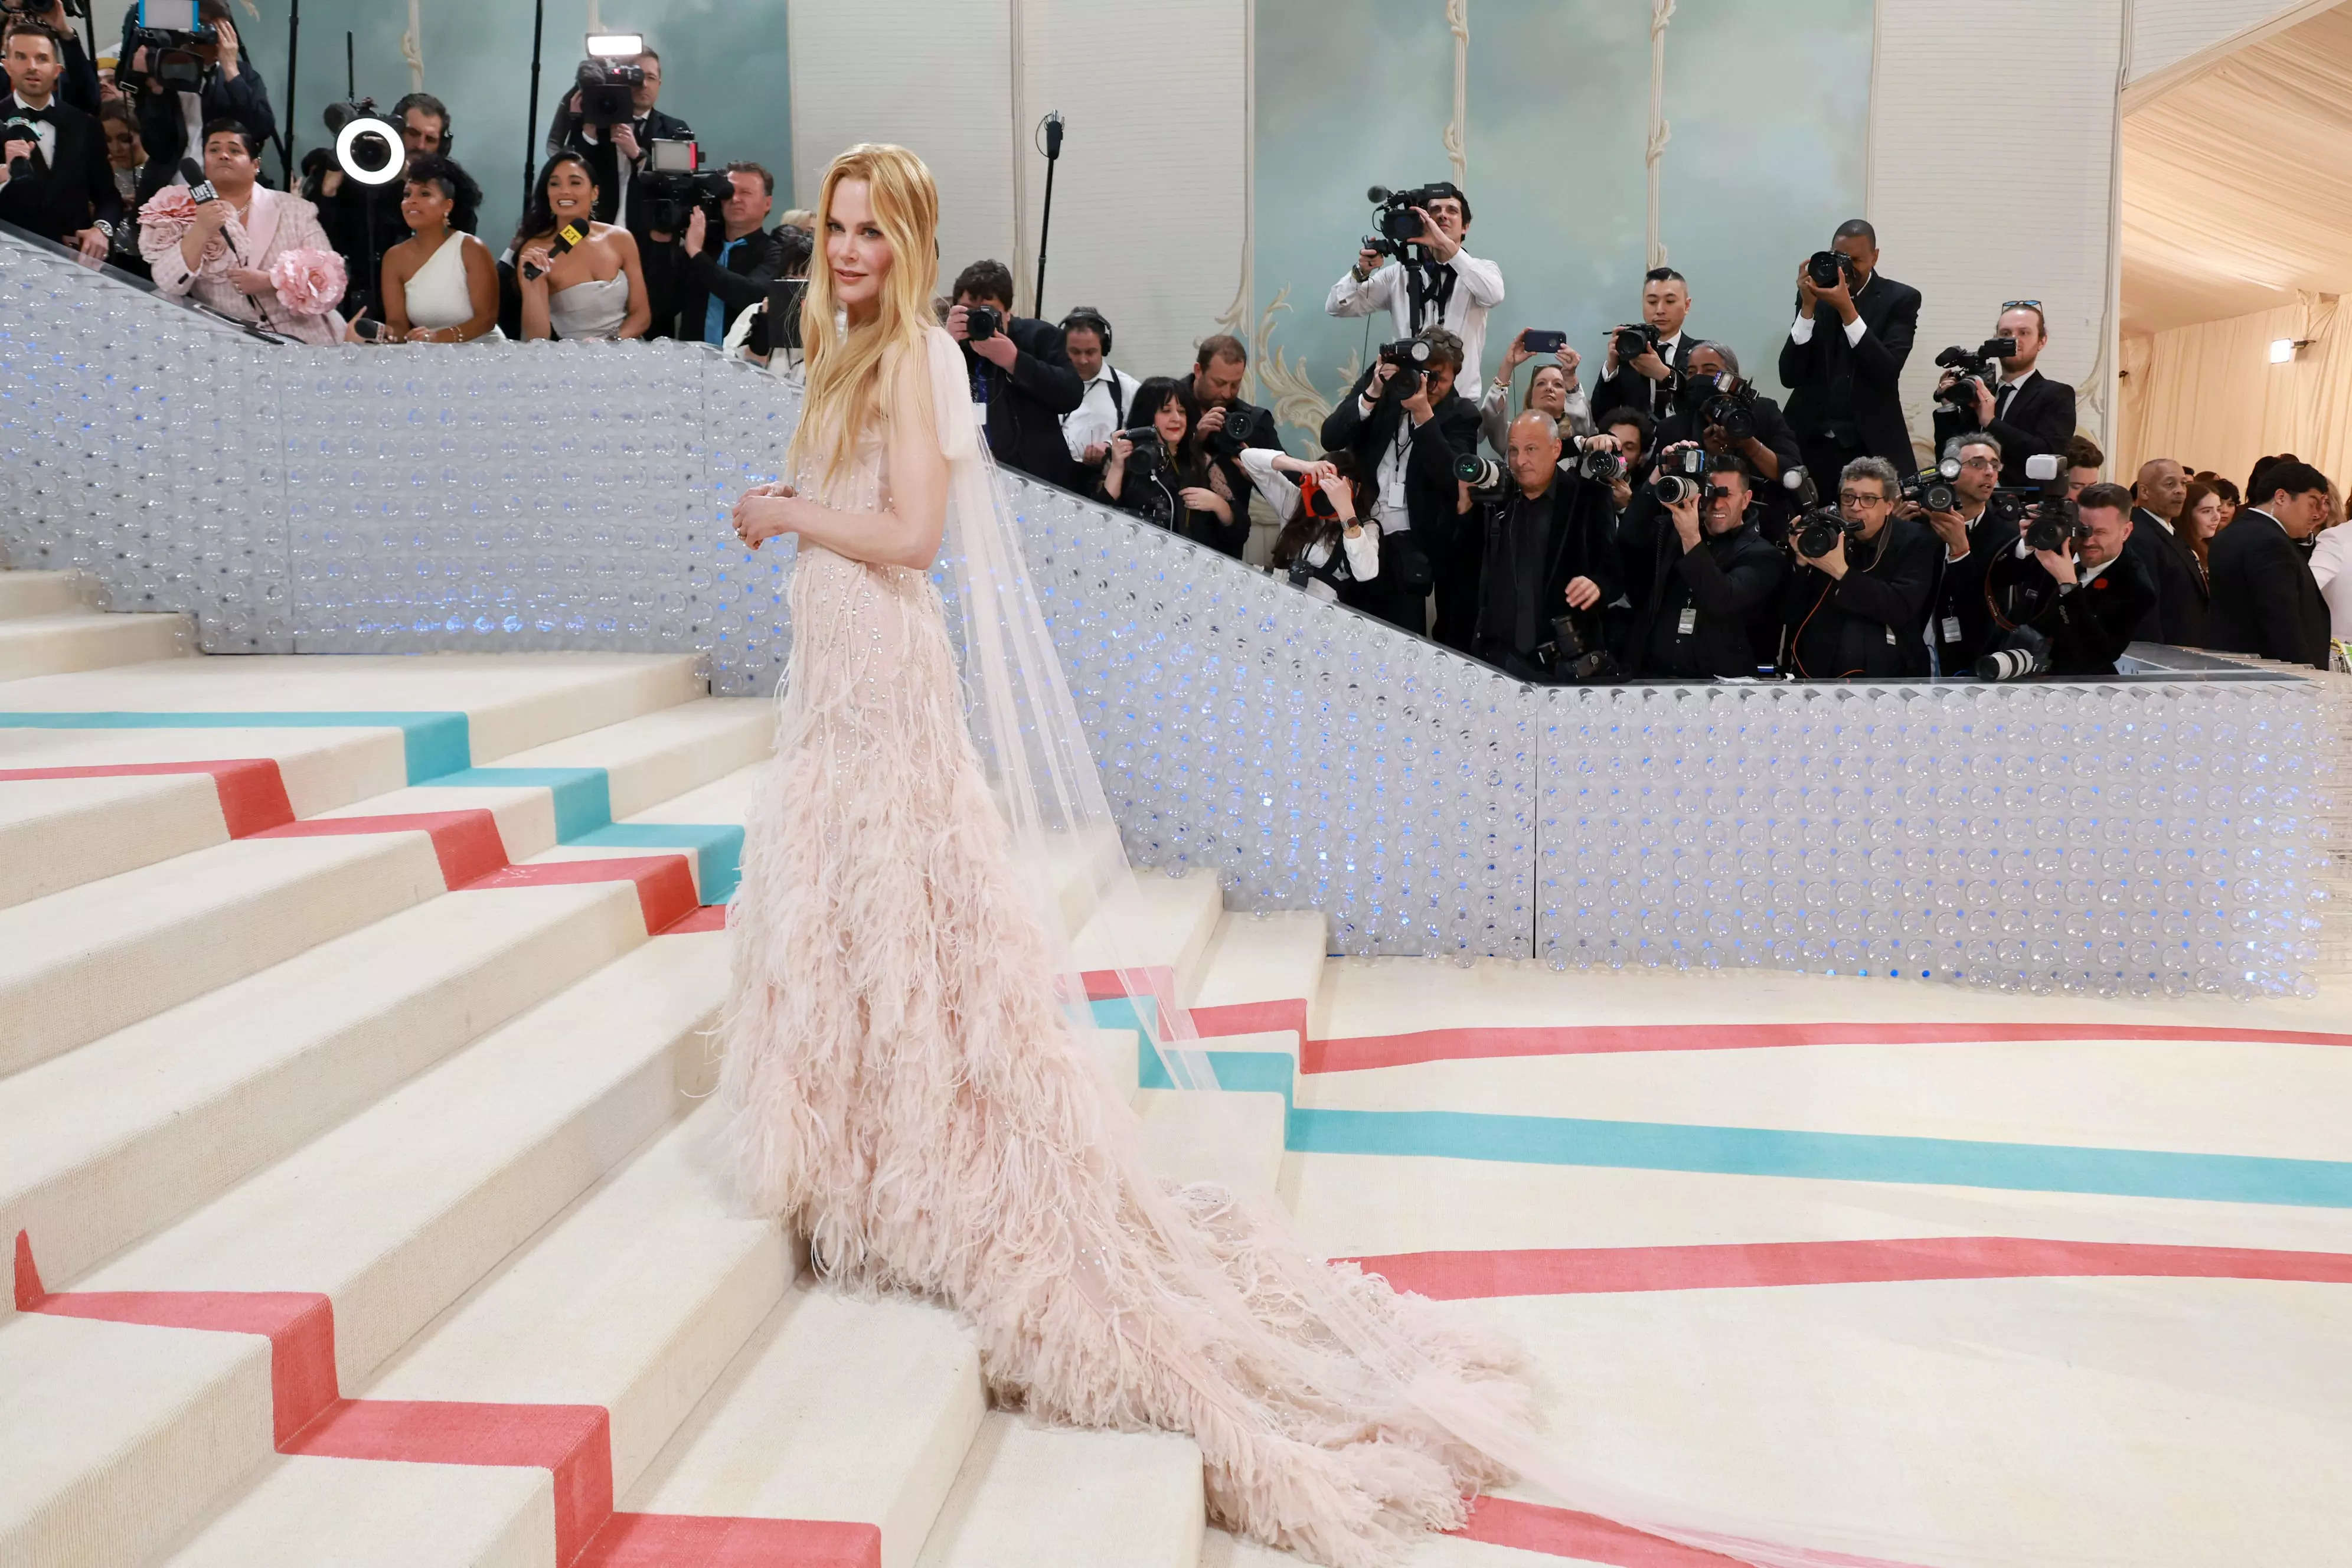 Nicole Kidman wore the iconic dress Karl Lagerfeld designed for her famous  2004 Chanel No. 5 commercial to the Met Gala